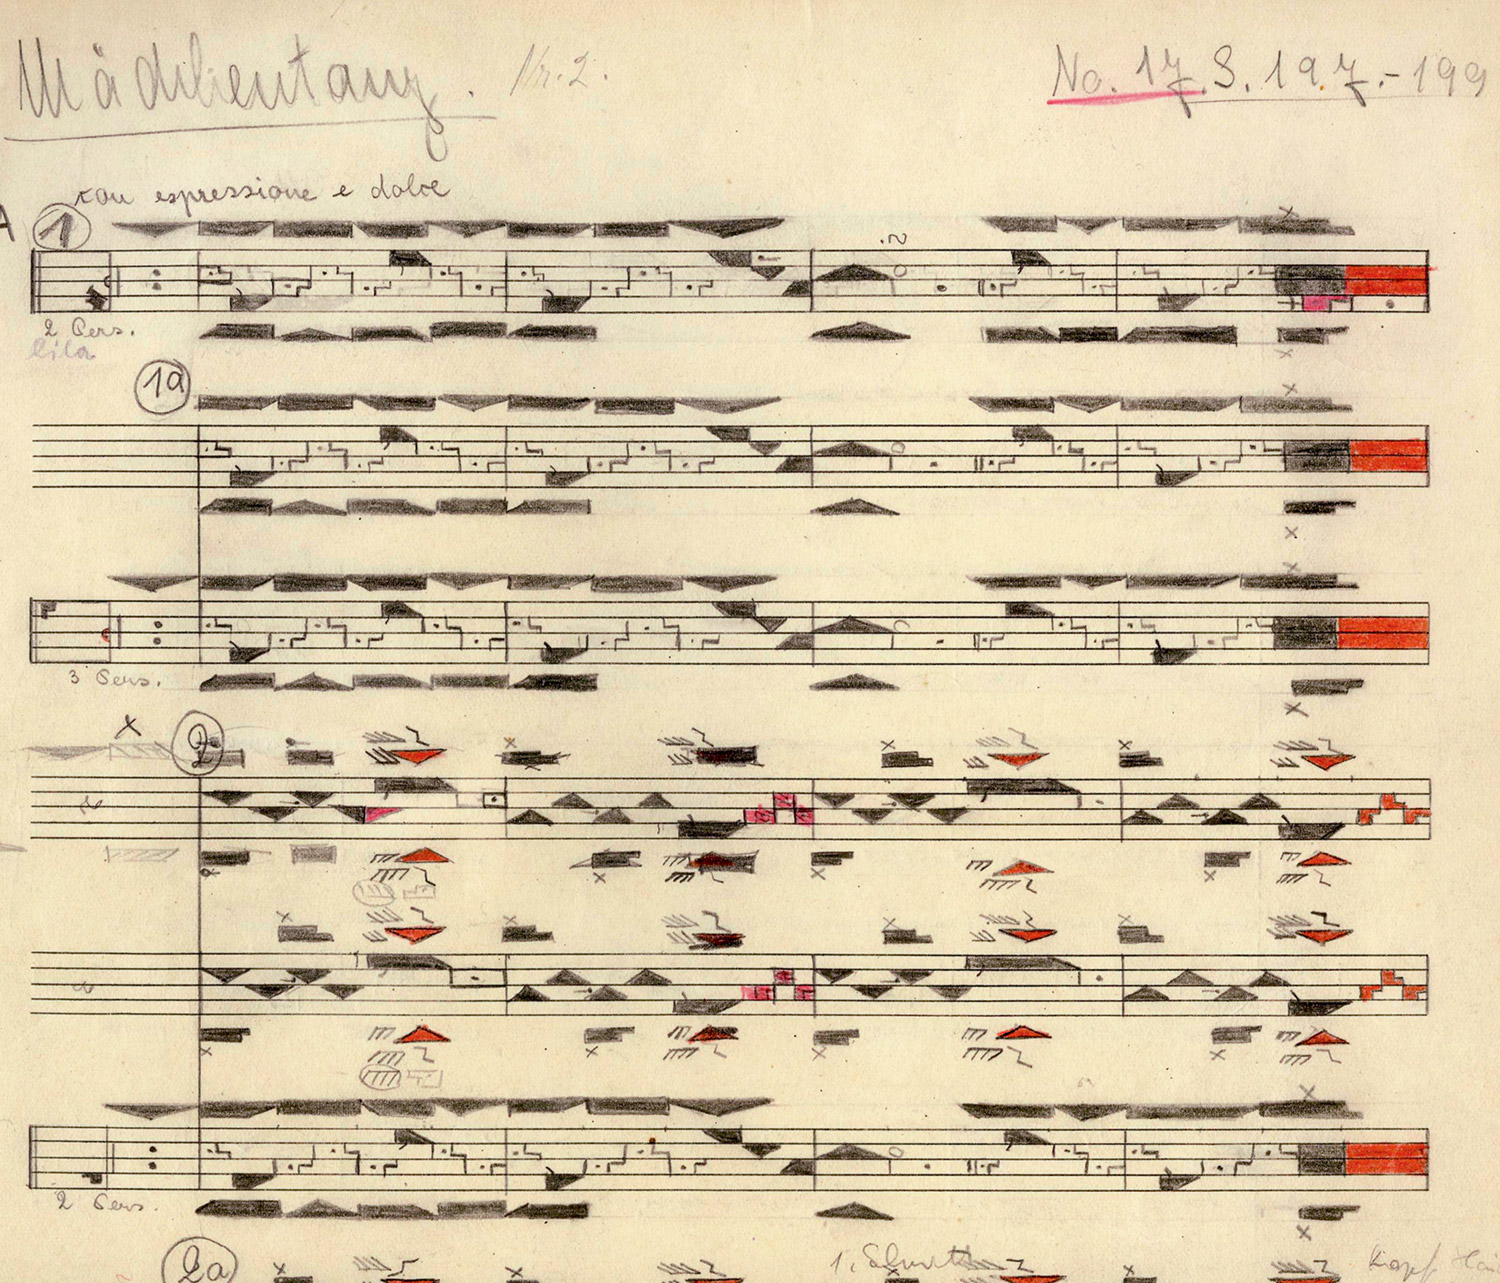 The labanotation of Laban’s choreography for the opera Prince Igor, performed in Berlin in 1930 (notated by Suzanne Ives).